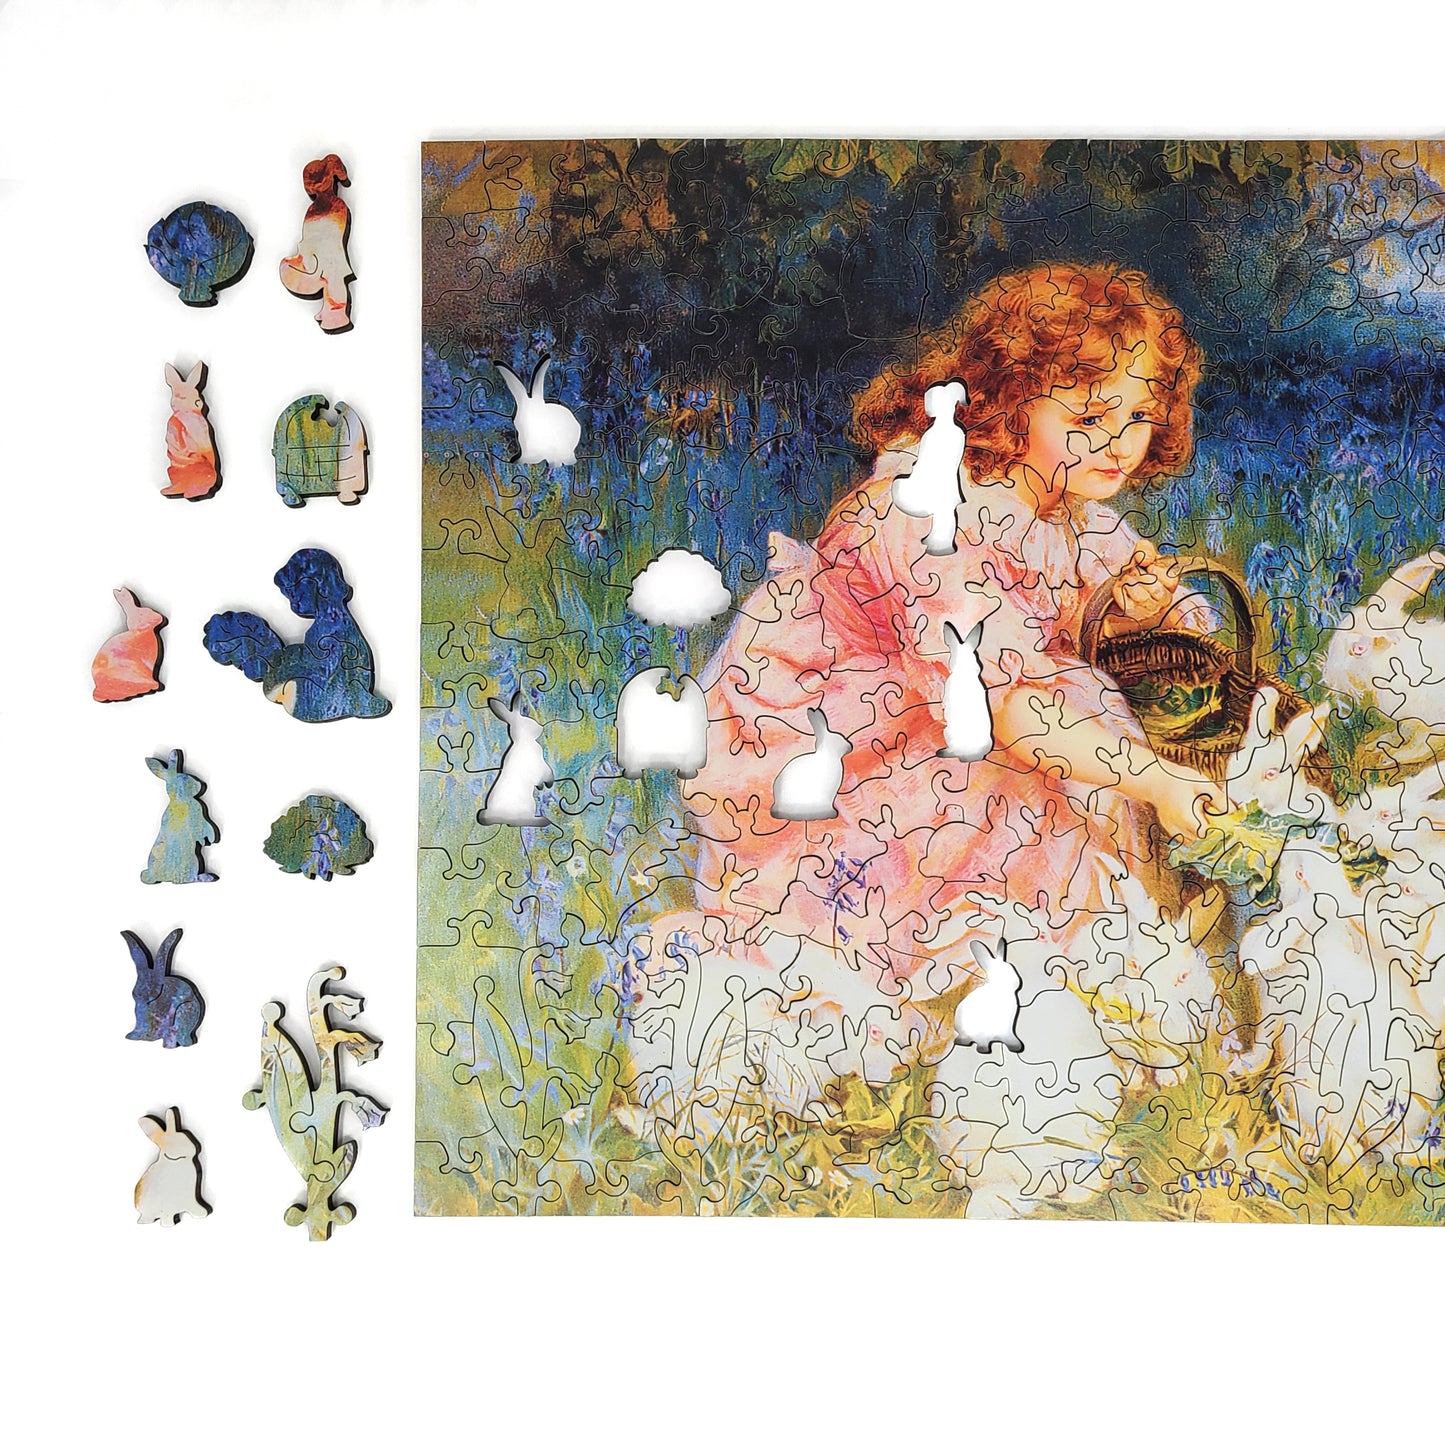 Wooden Jigsaw Puzzle with Uniquely Shaped Pieces for Adults - 260 Pieces - Feeding the Rabbits